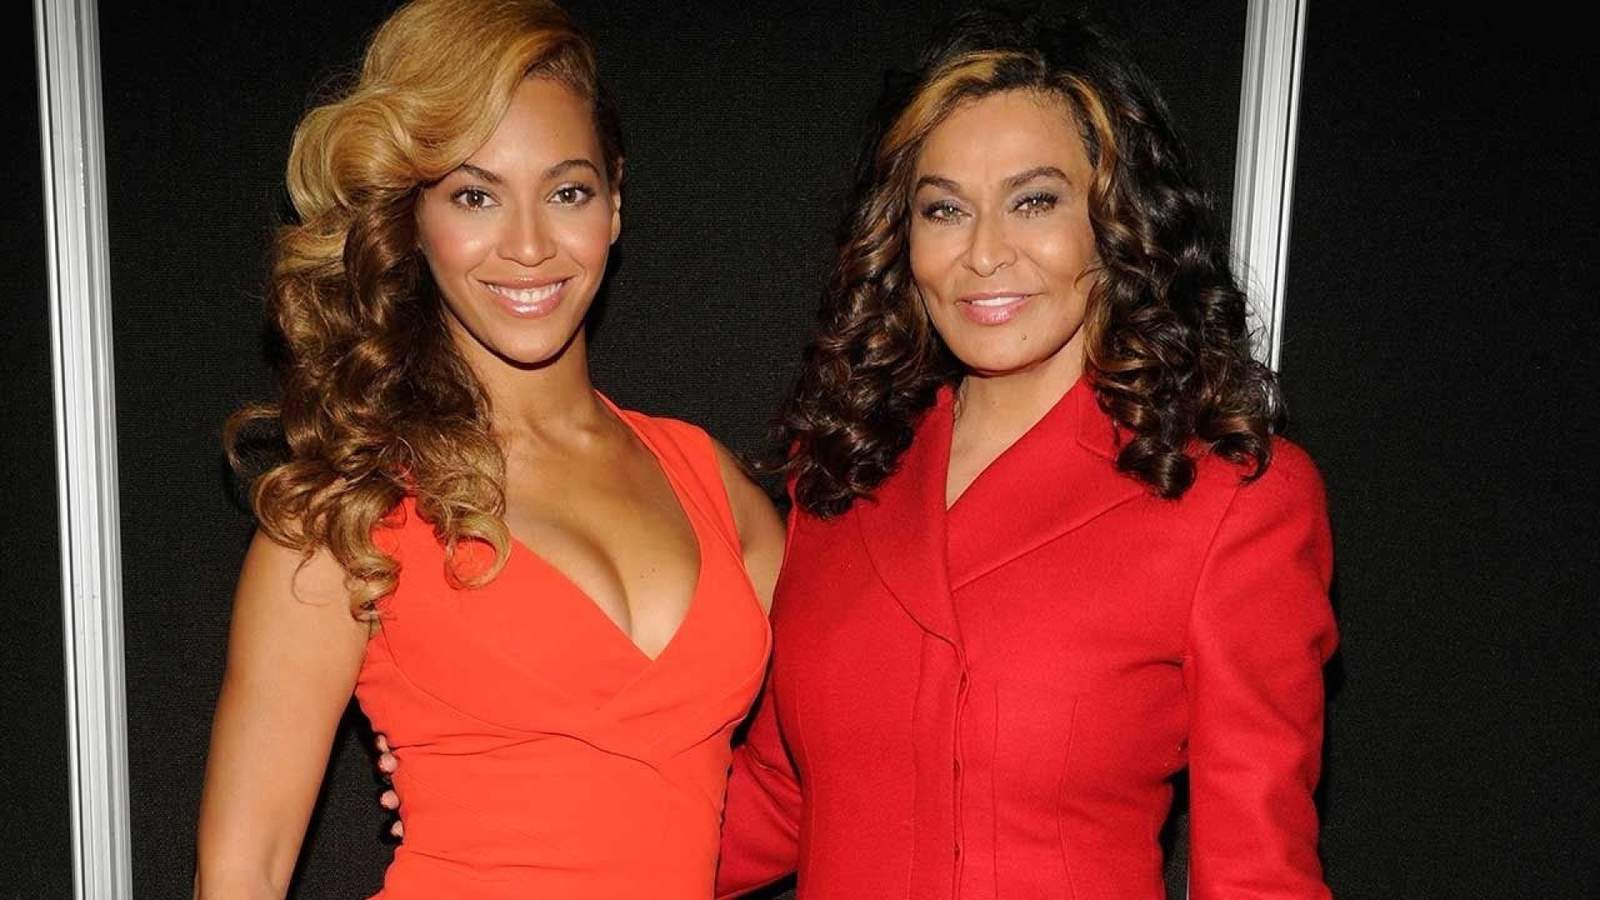 Tina Knowles-Lawson tells how an inaccurate birth certificate lead to Beyoncé's iconic name